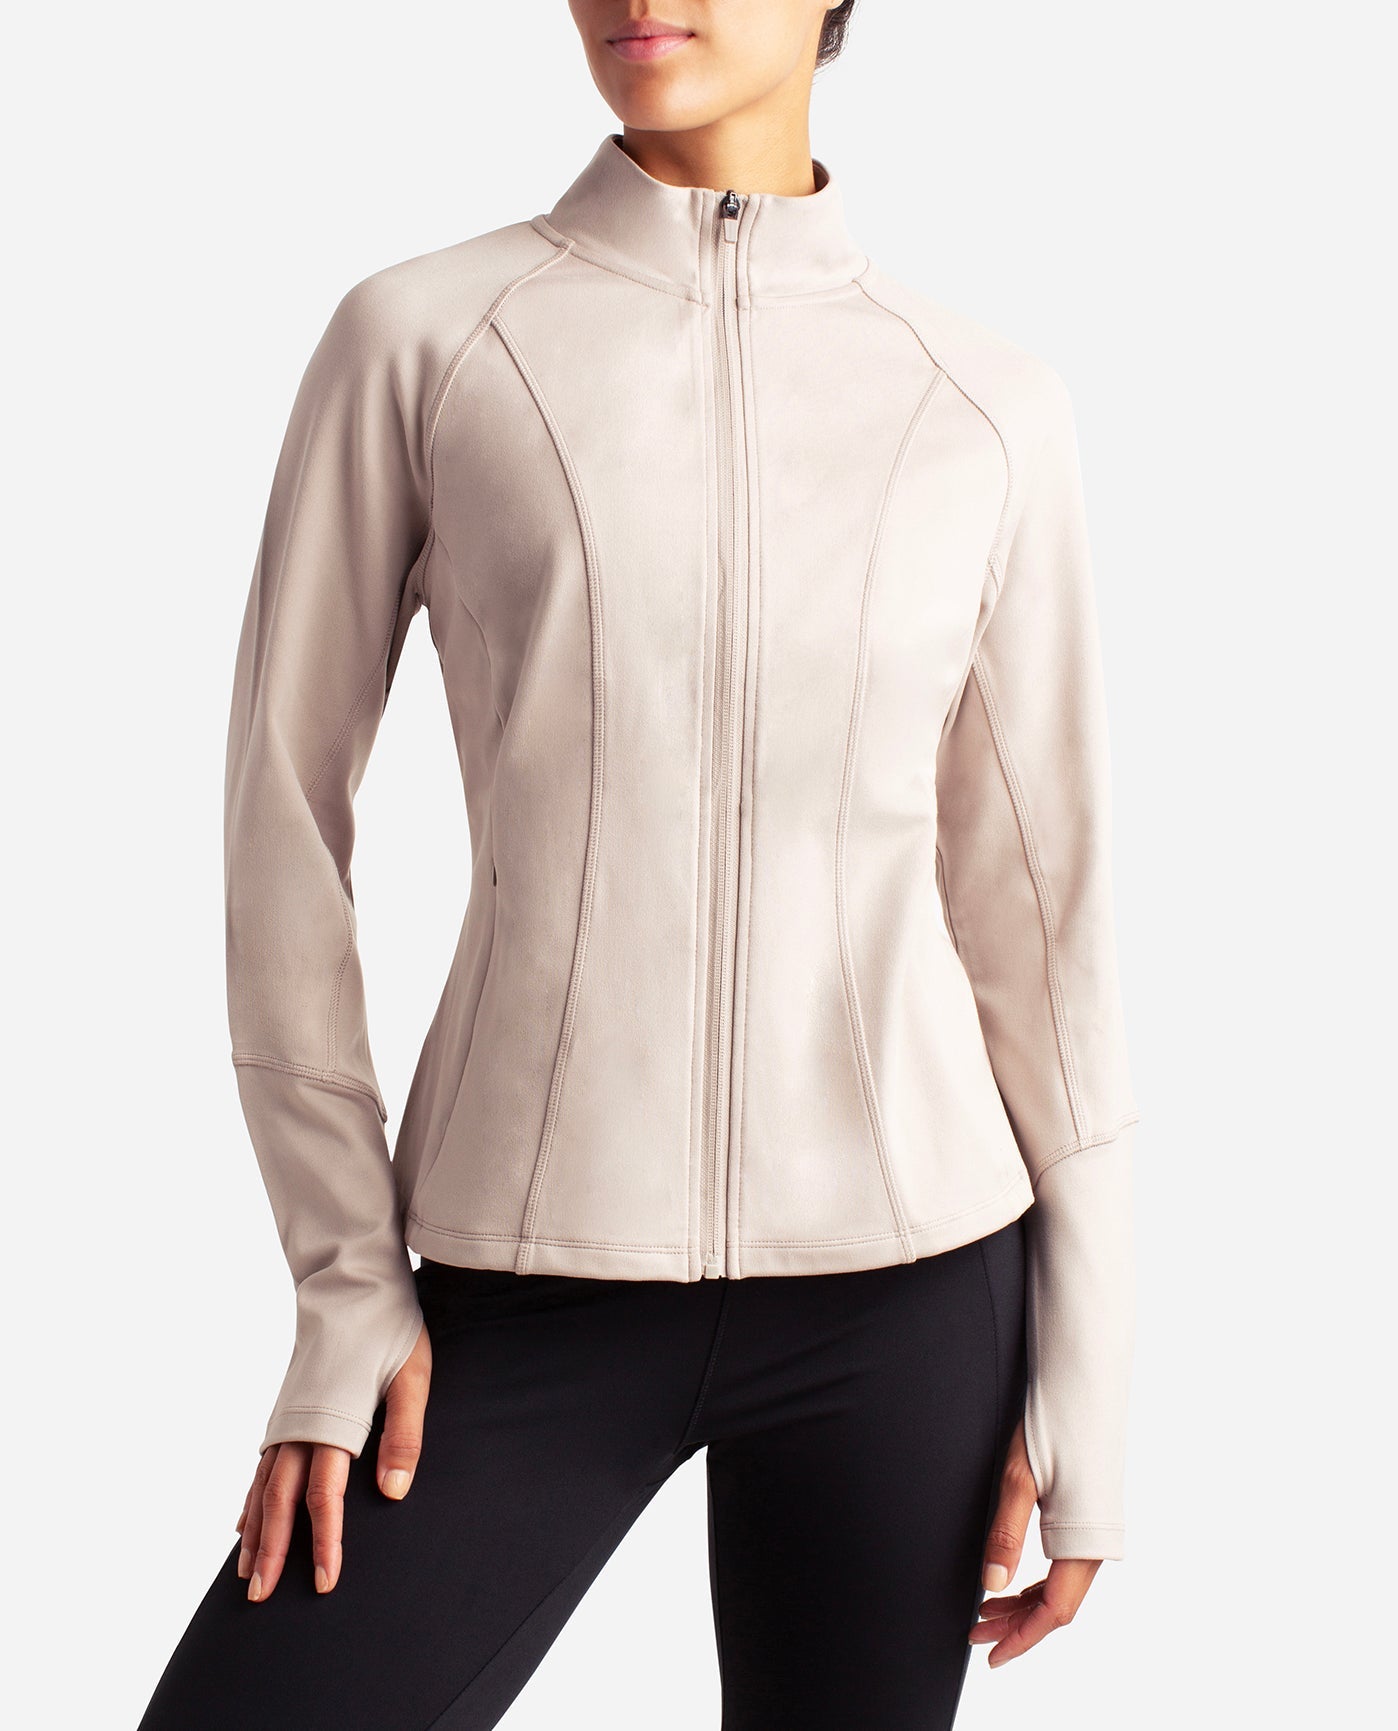 Yoga Jacket, Shop The Largest Collection